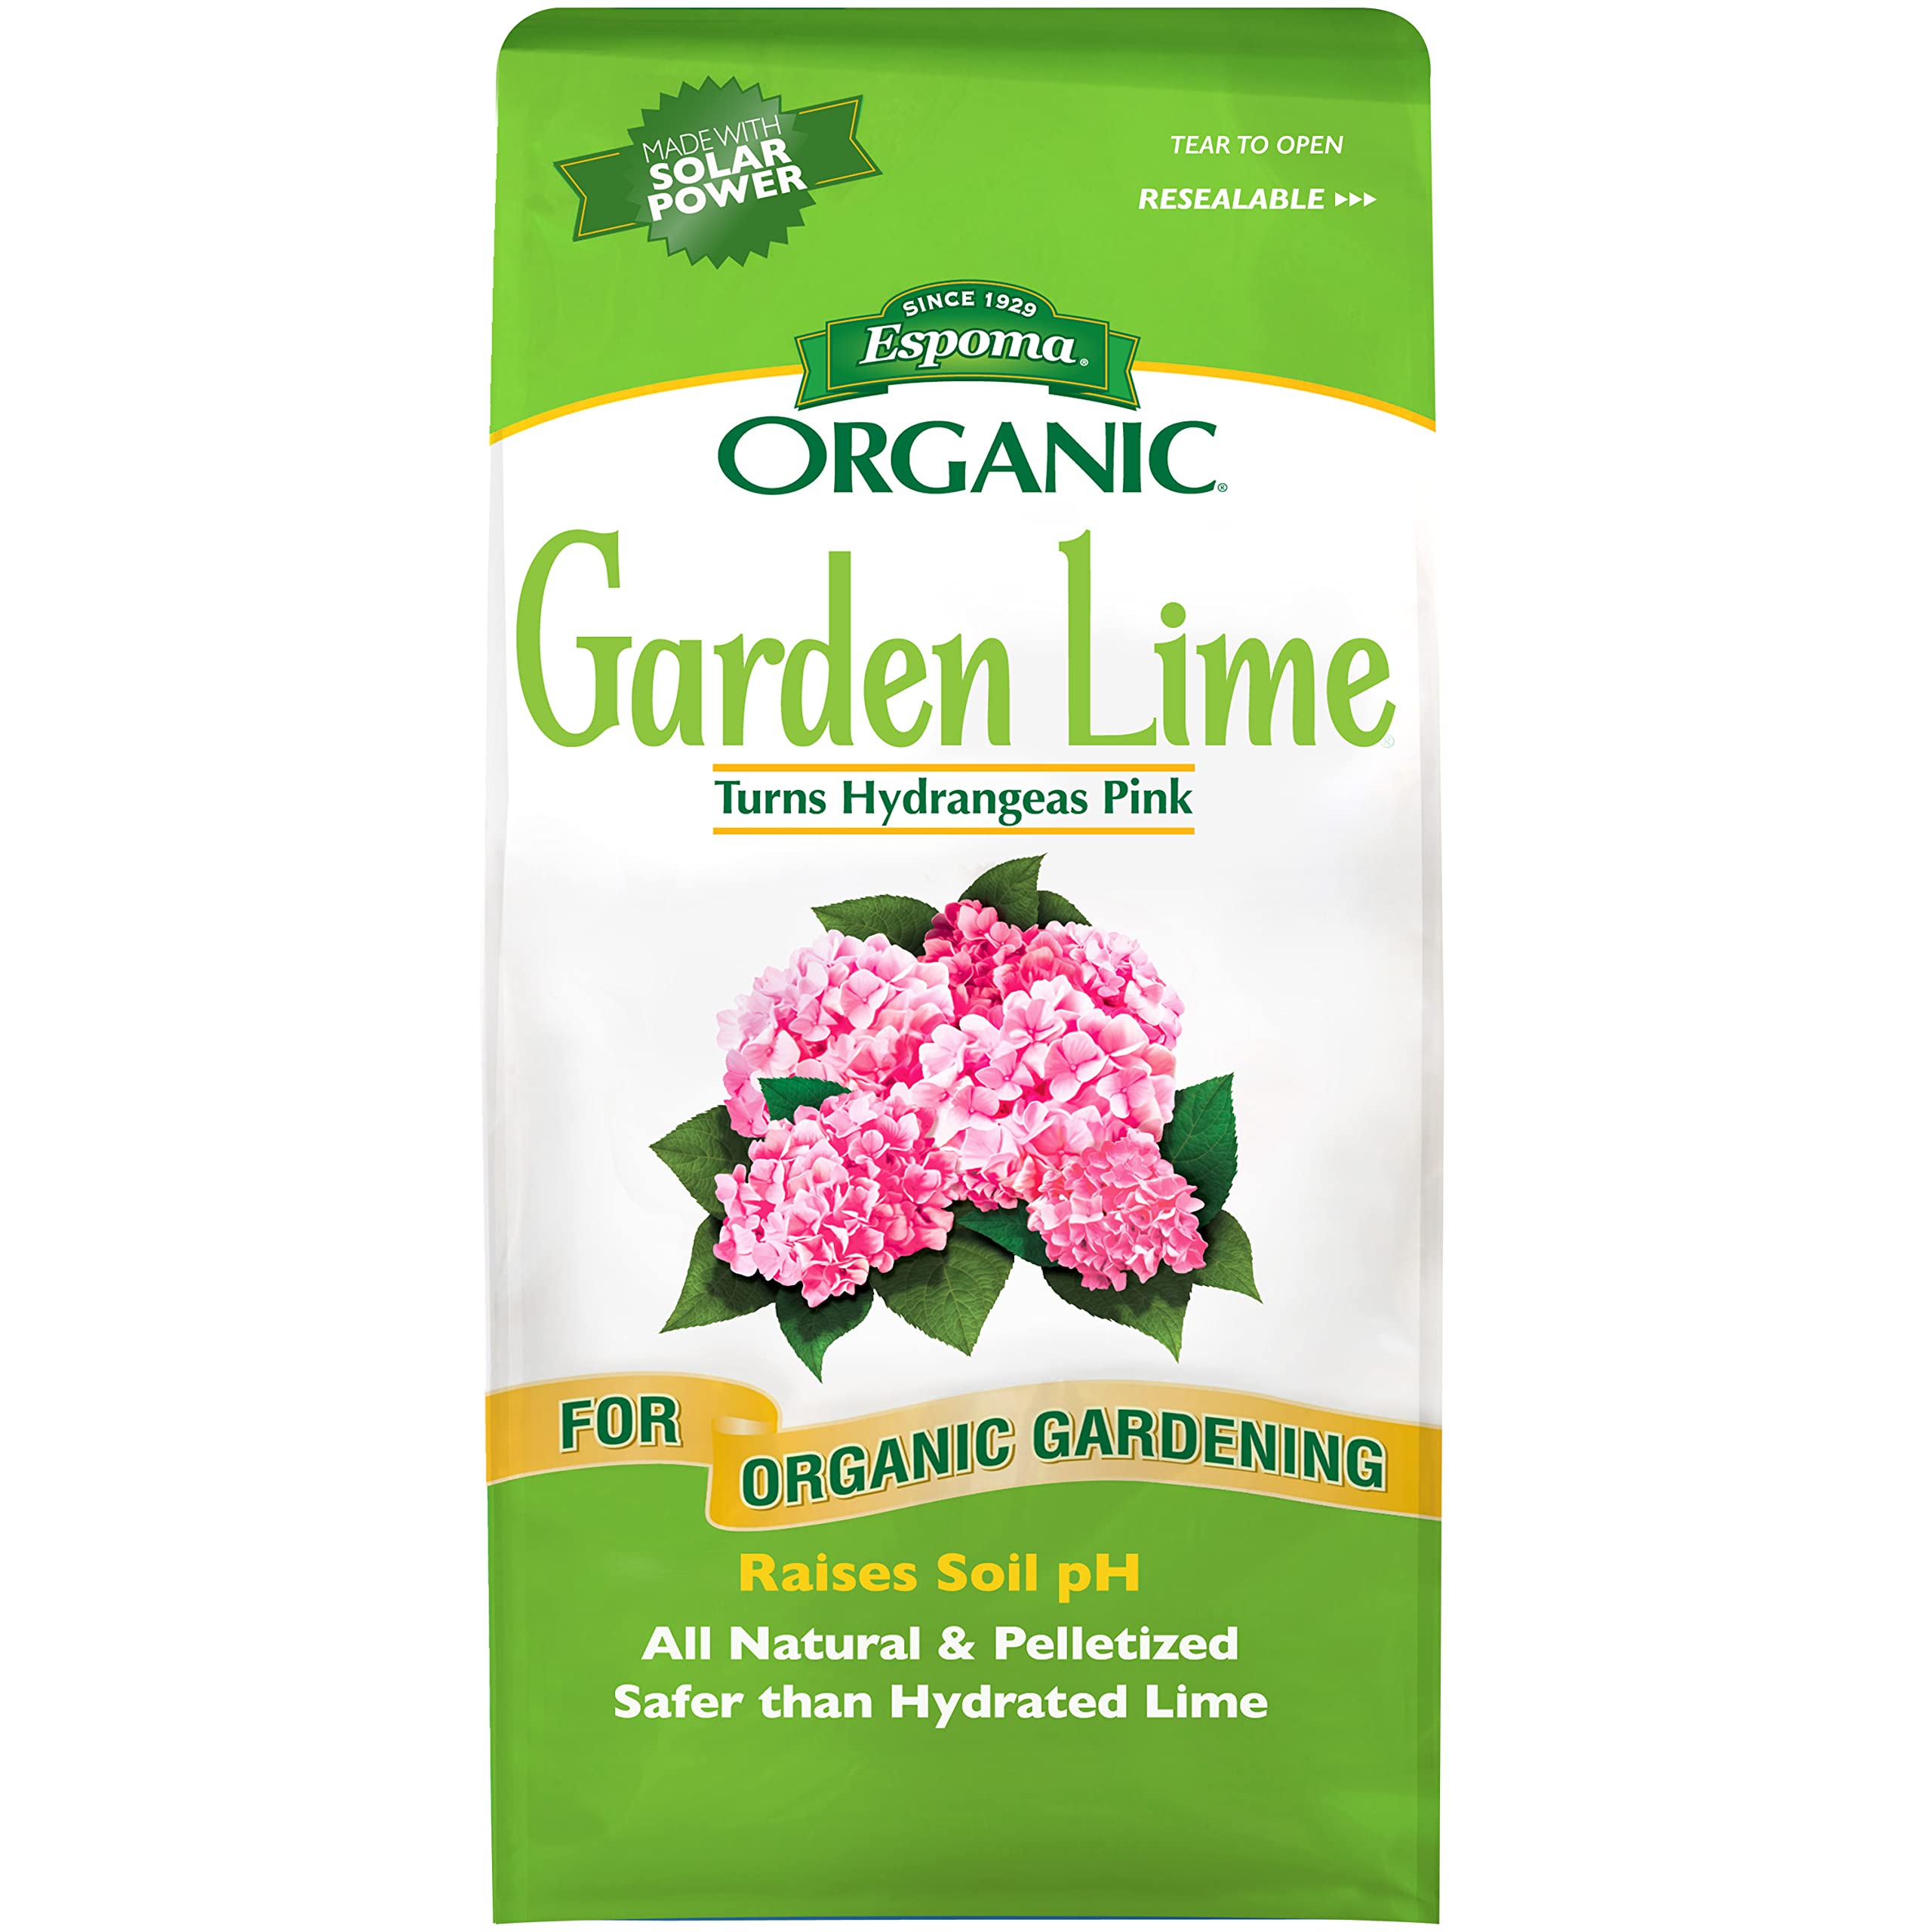 Pelletized garden lime great for pH and helping Hydrangeas turn pink